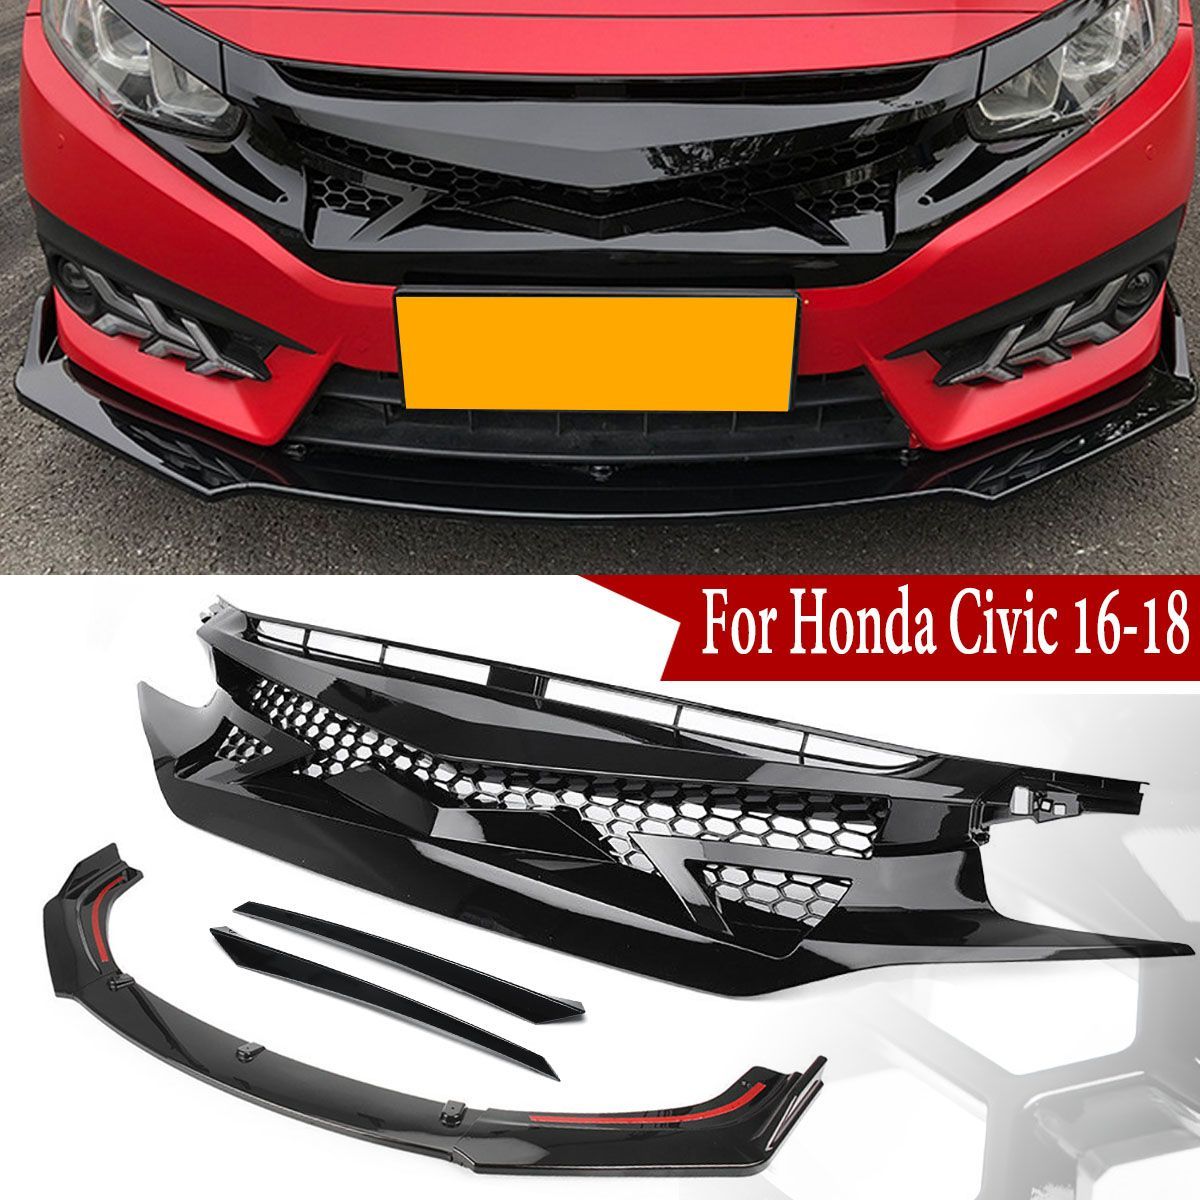 For-Honda-Civic-2016-18-6Pcs-Front-Hood-Mesh-Grill-Grille-Bumper-Trims-Eyebrow-1489993